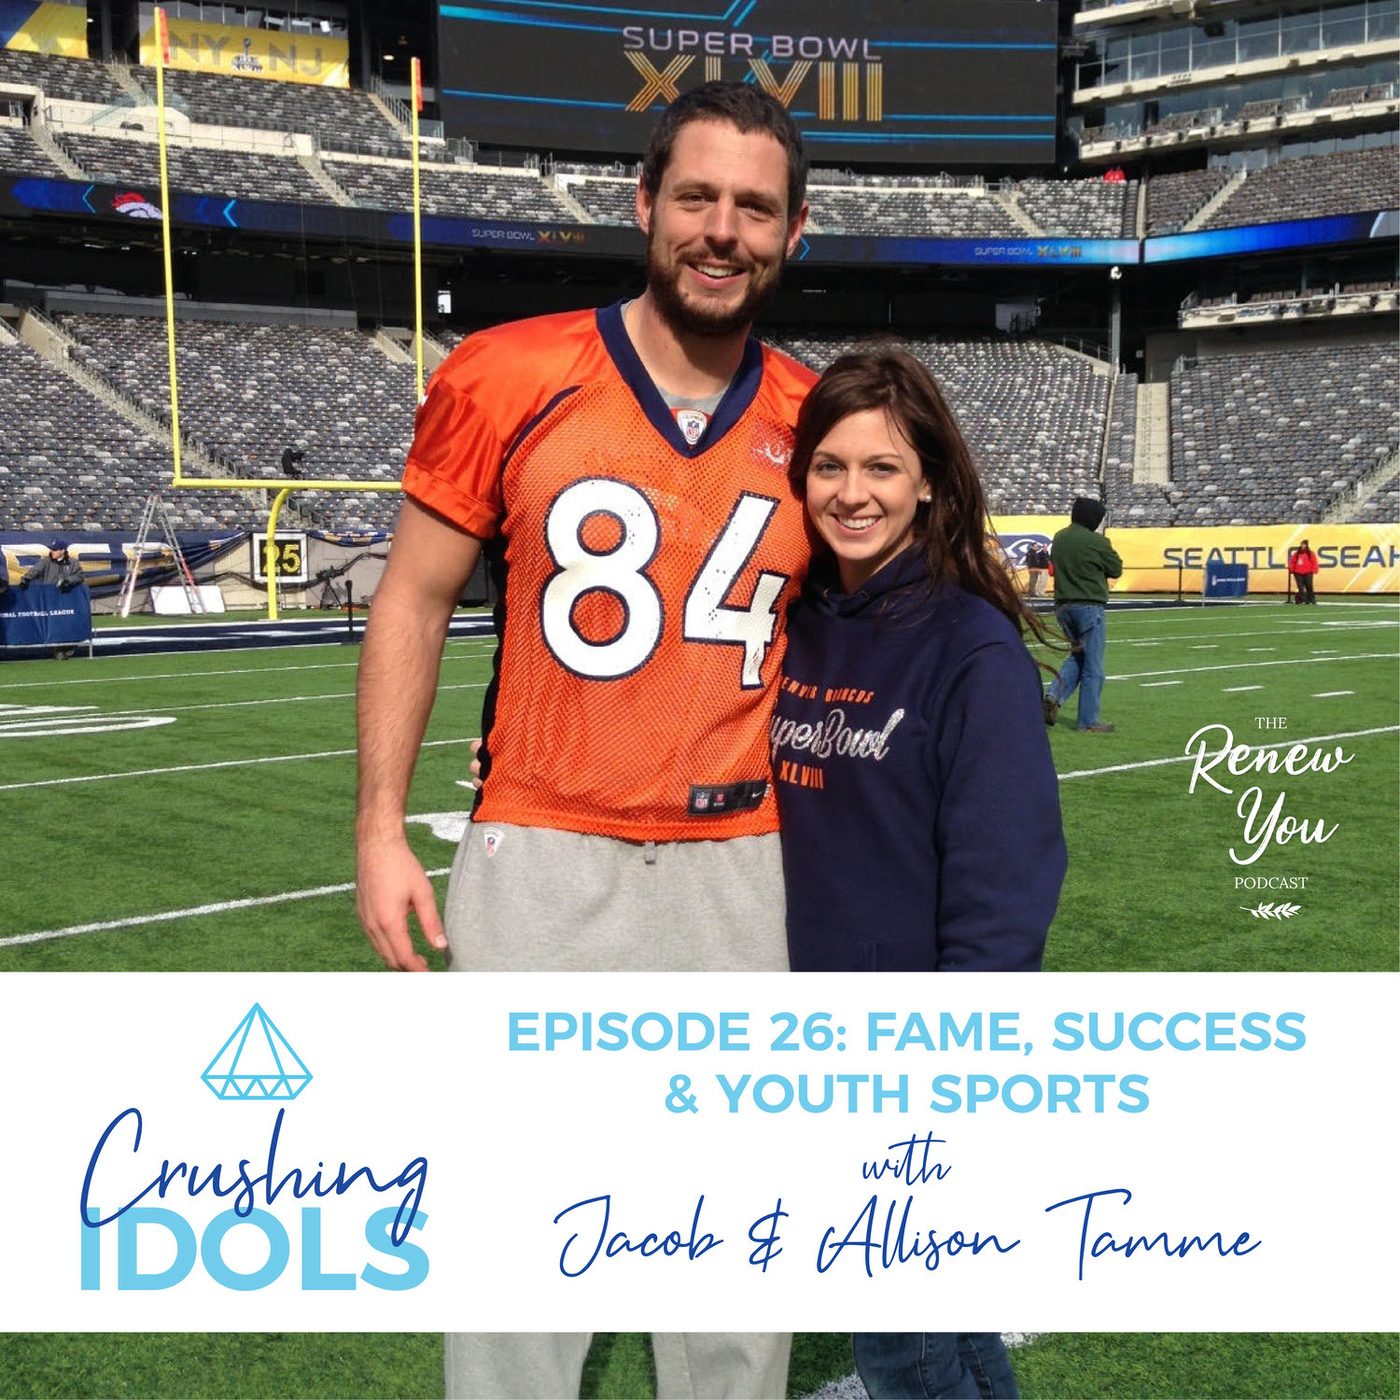 Episode 26: Crushing Idols: The Idols of Fame, Success & Youth Sports with Jacob and Allison Tamme